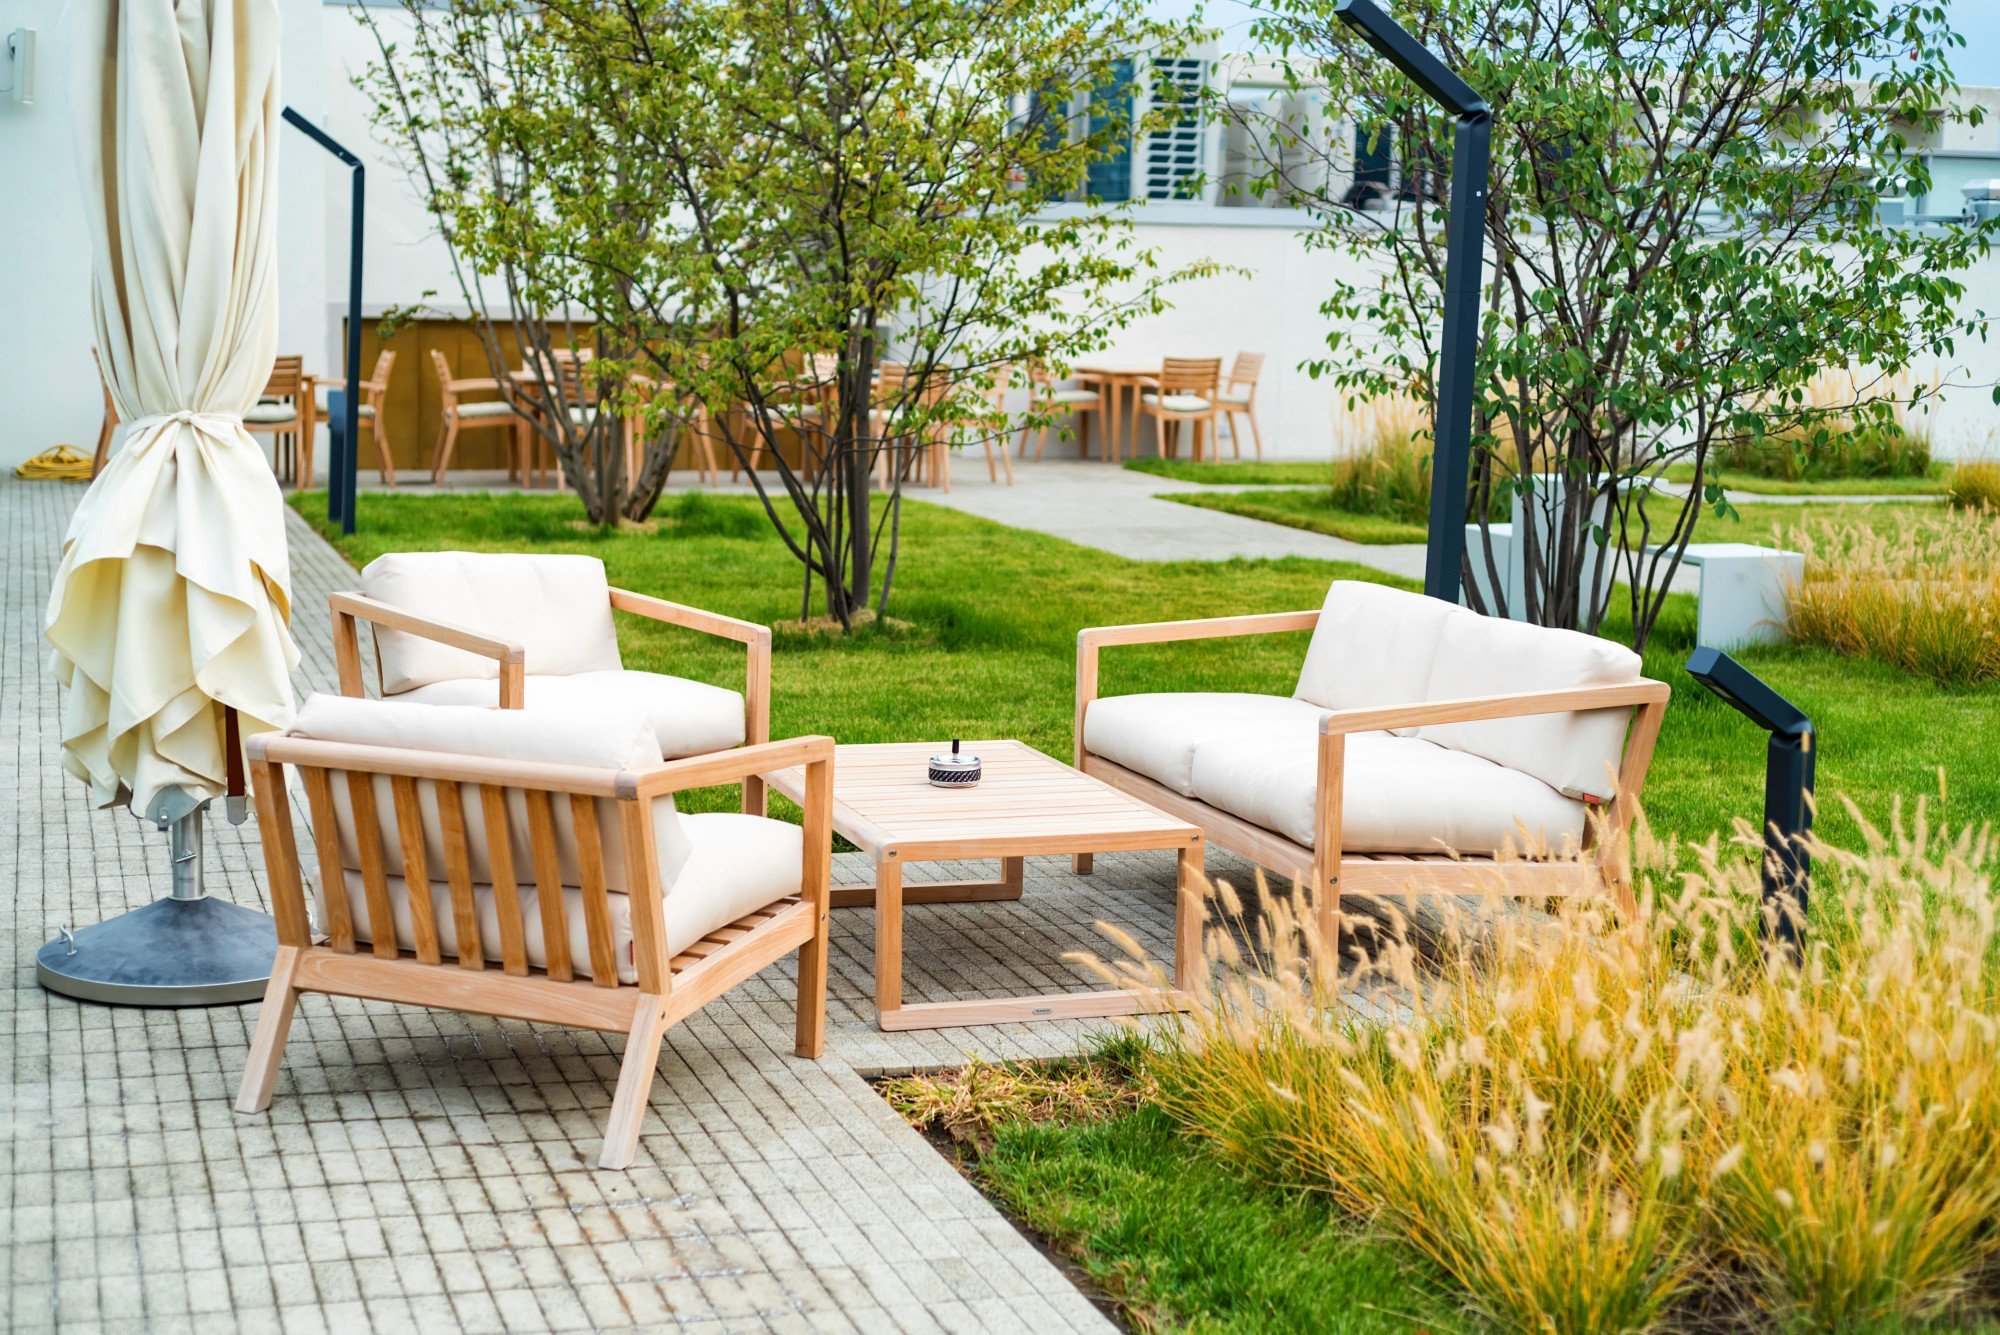 A great patio design alternates between relaxing and entertaining. Draw inspiration for your own design with these backyard deck ideas on a budget.